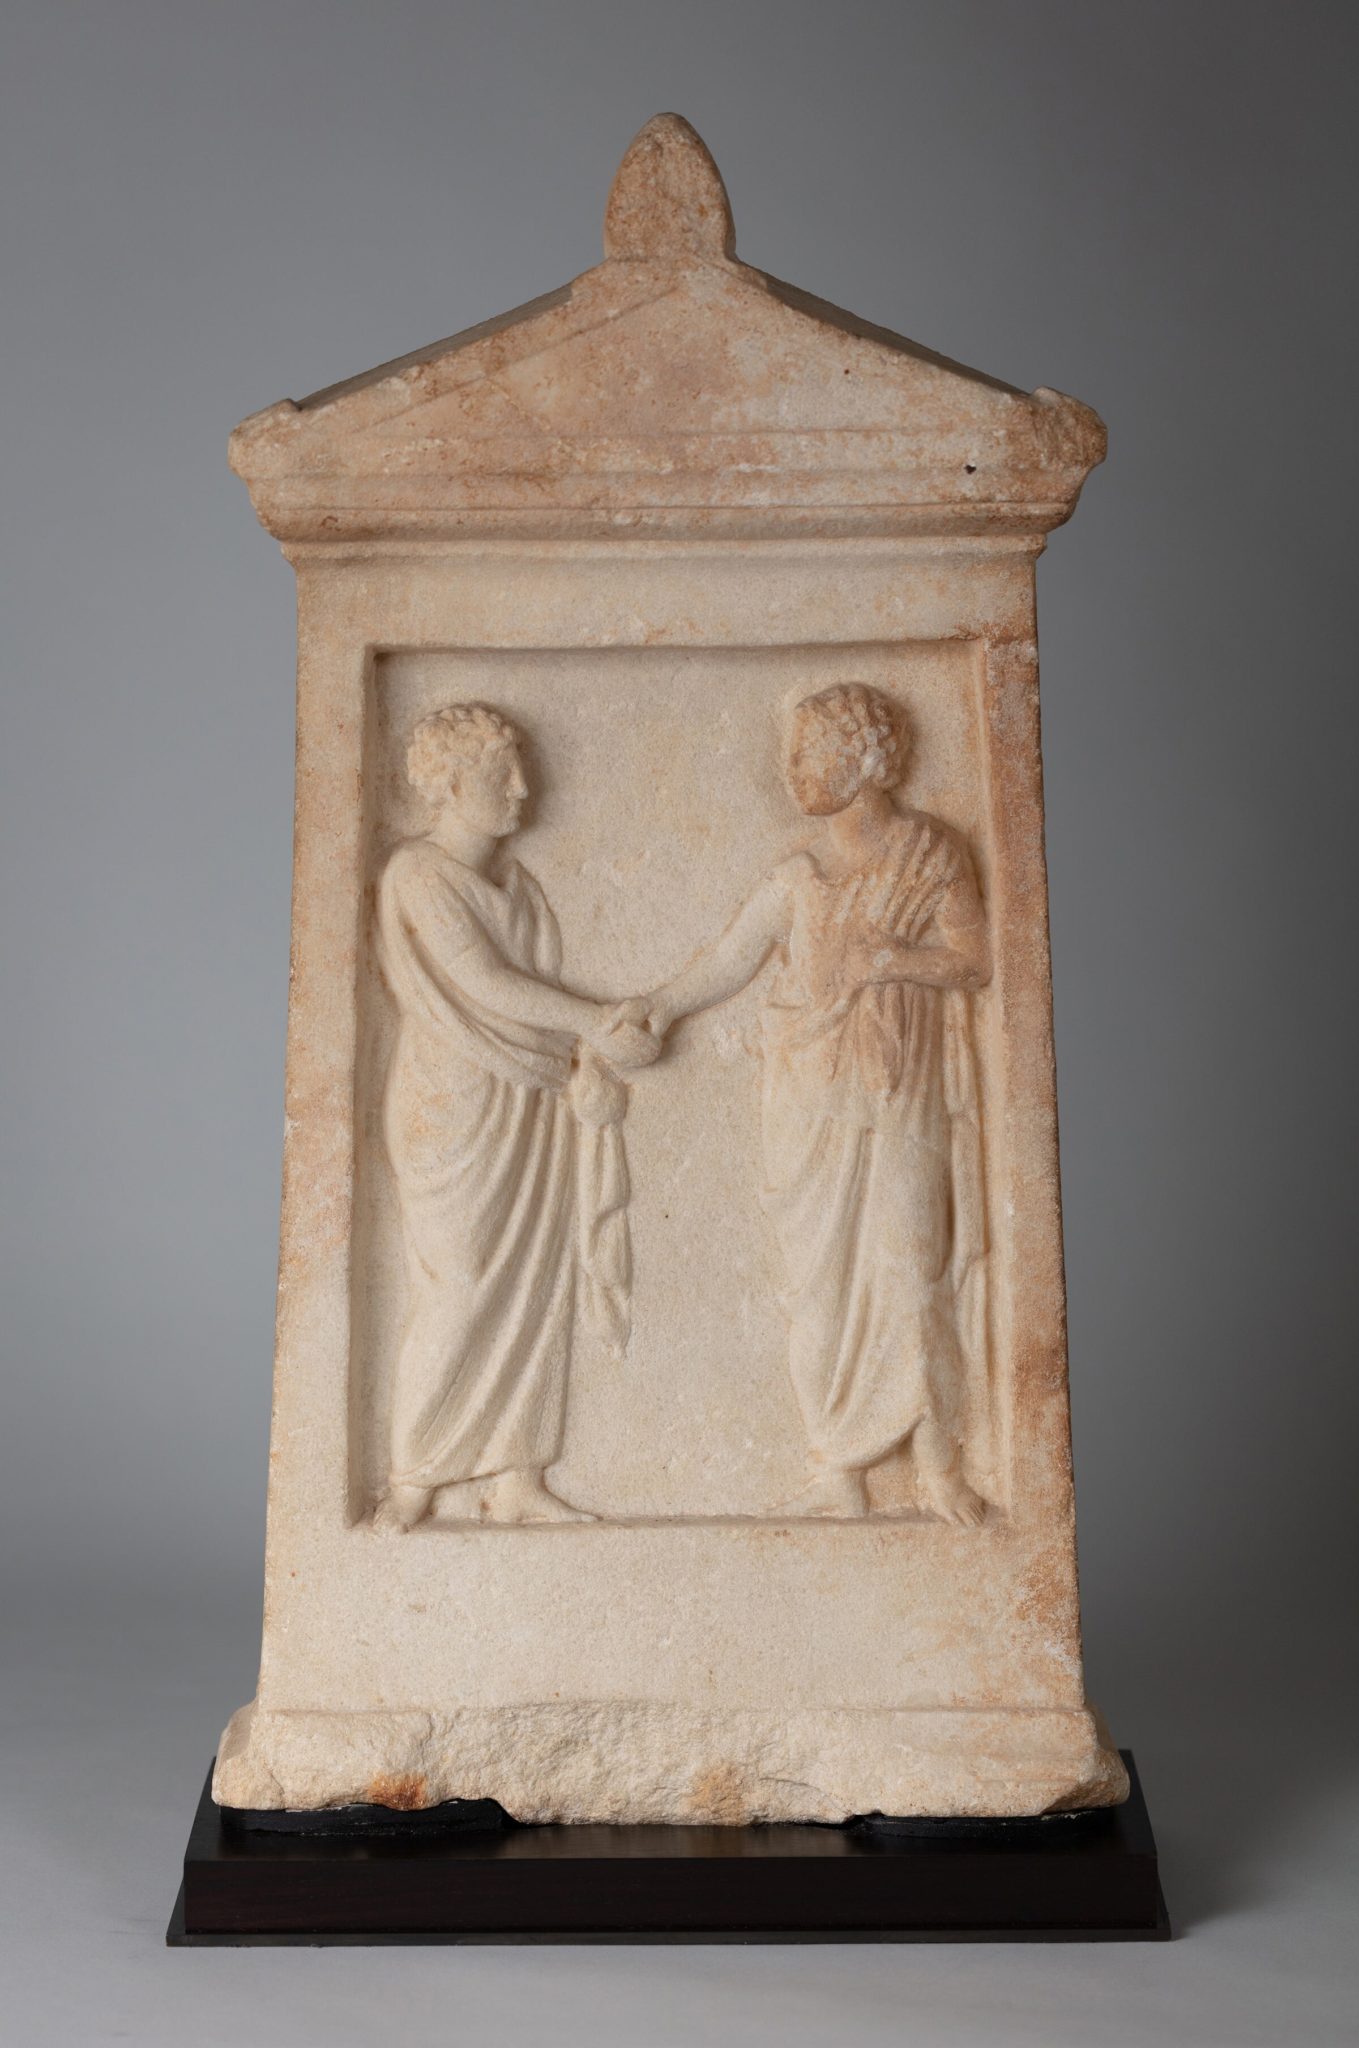 Ancient grave marker with a relief carving of two figures in togas, grasping hands.